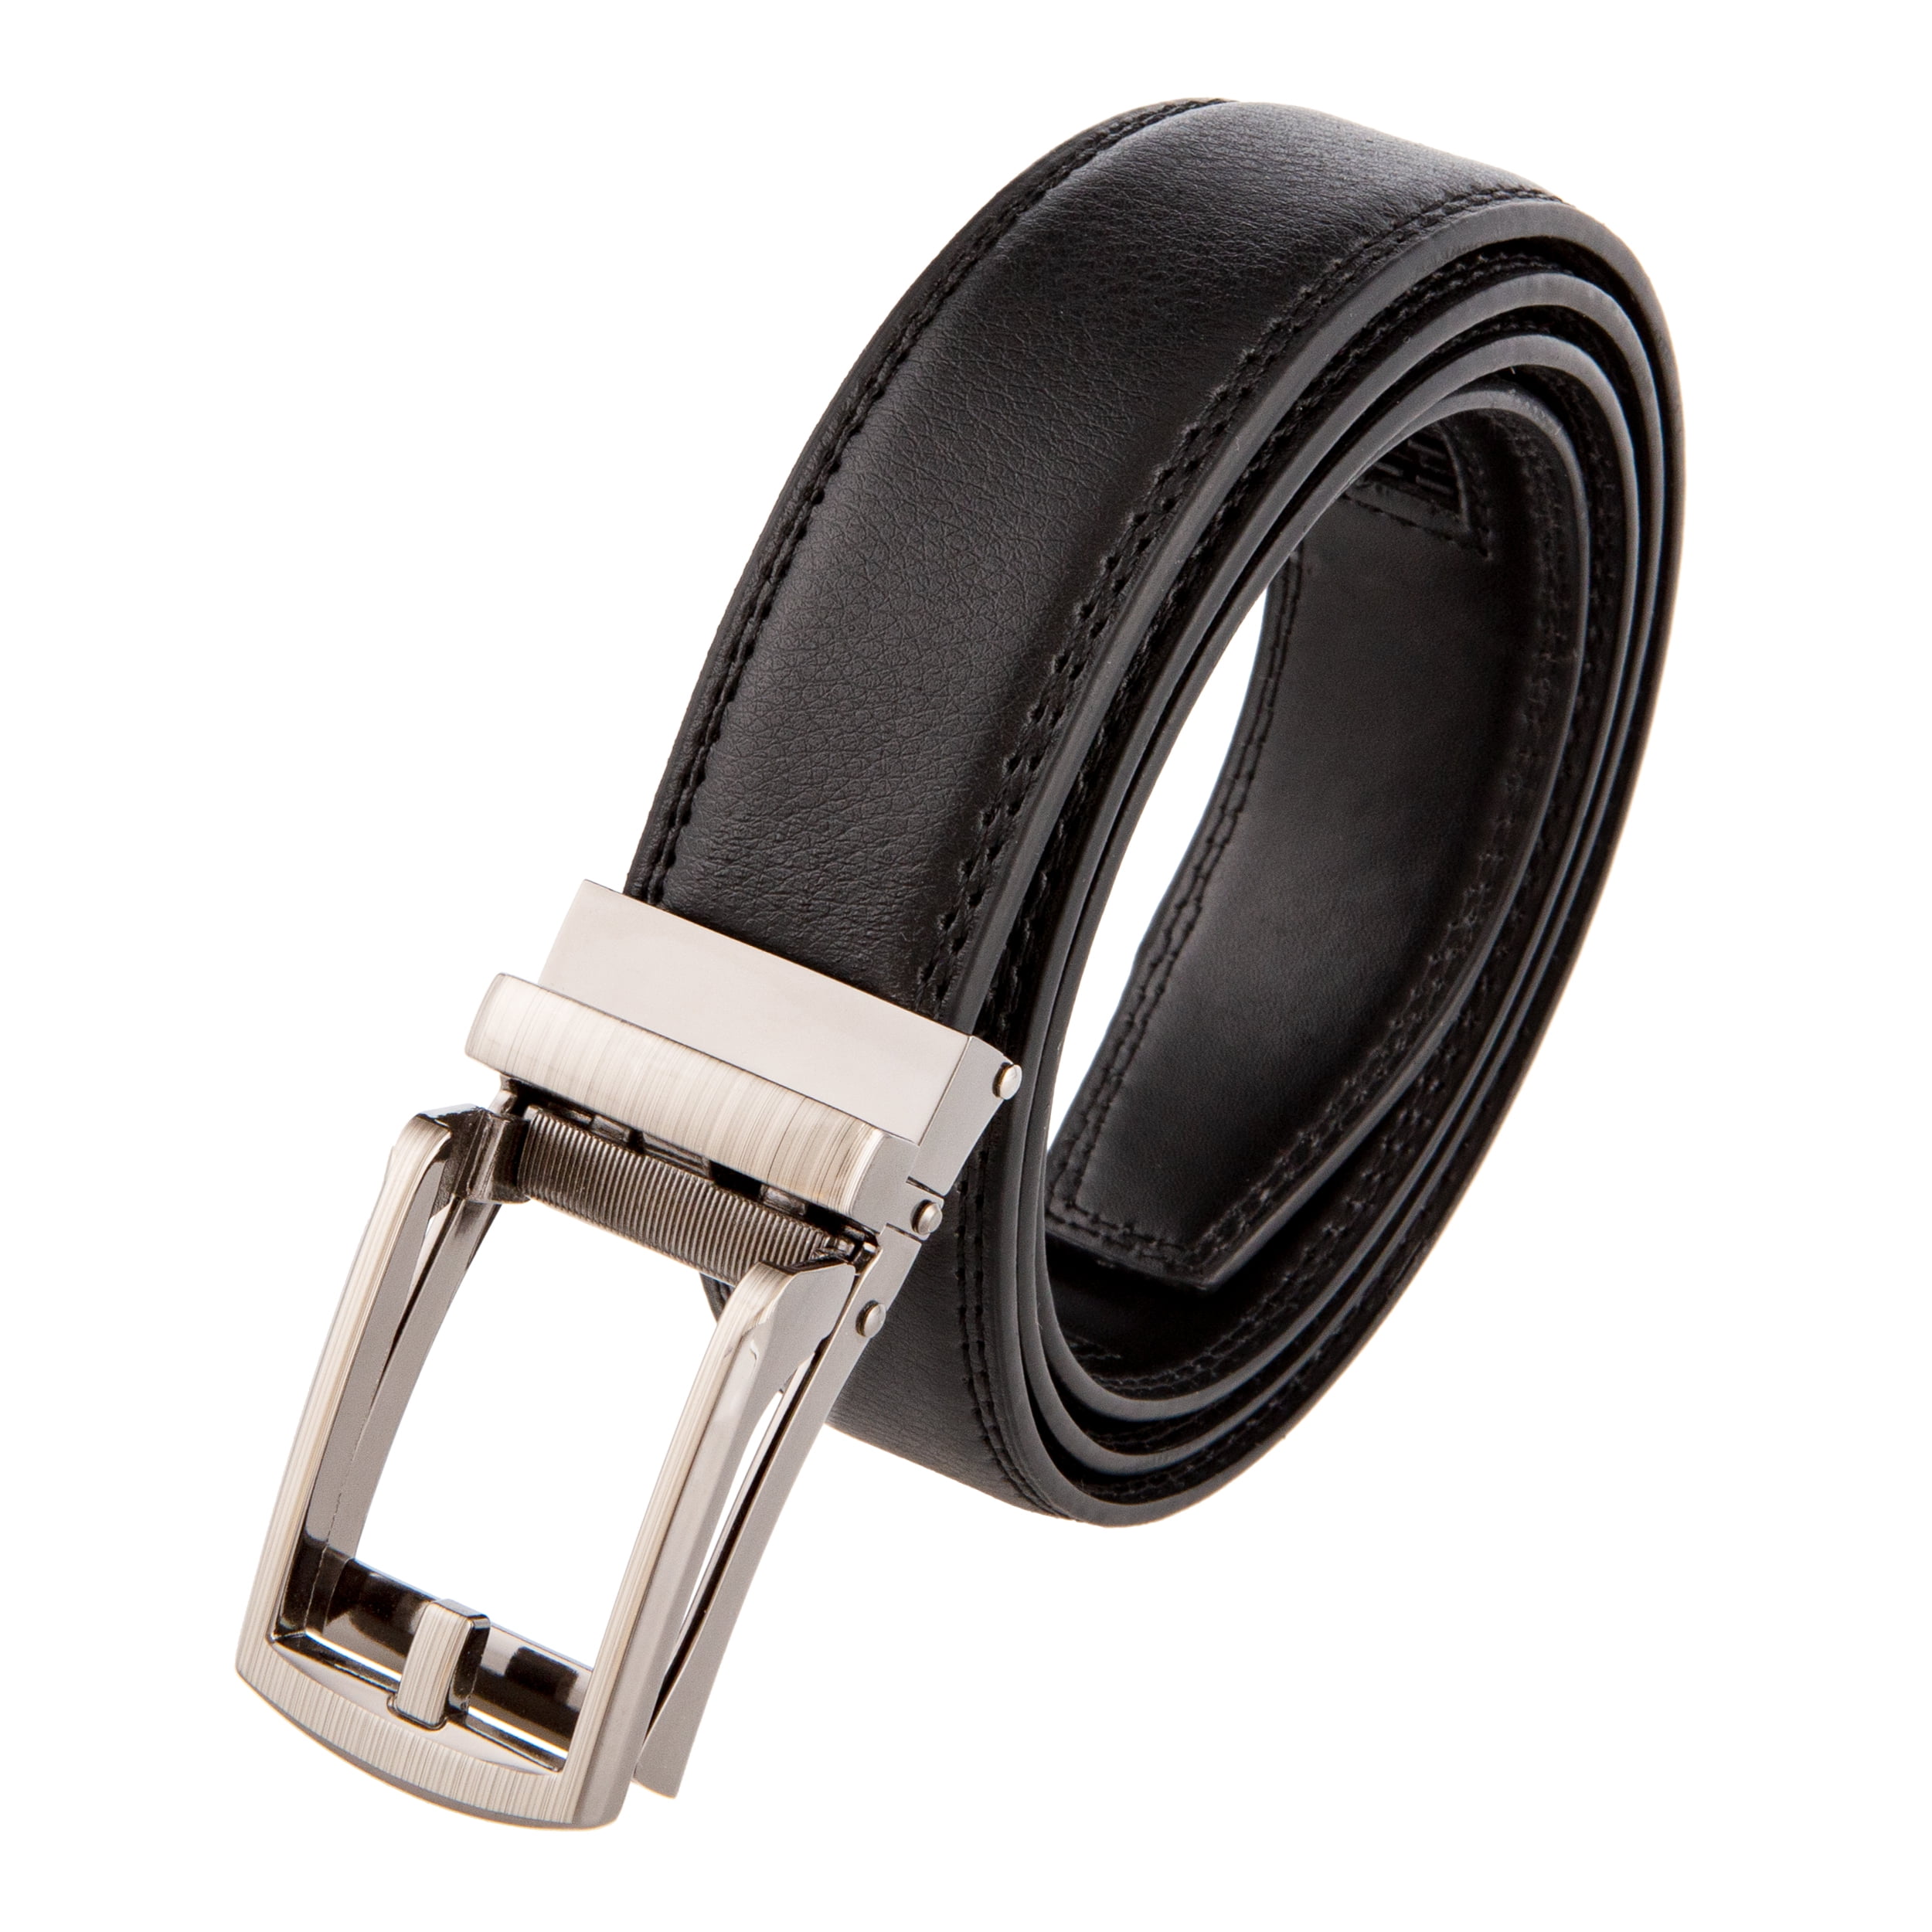 Costyle New Style Comfort Click Belt Men Automatic Adjustable